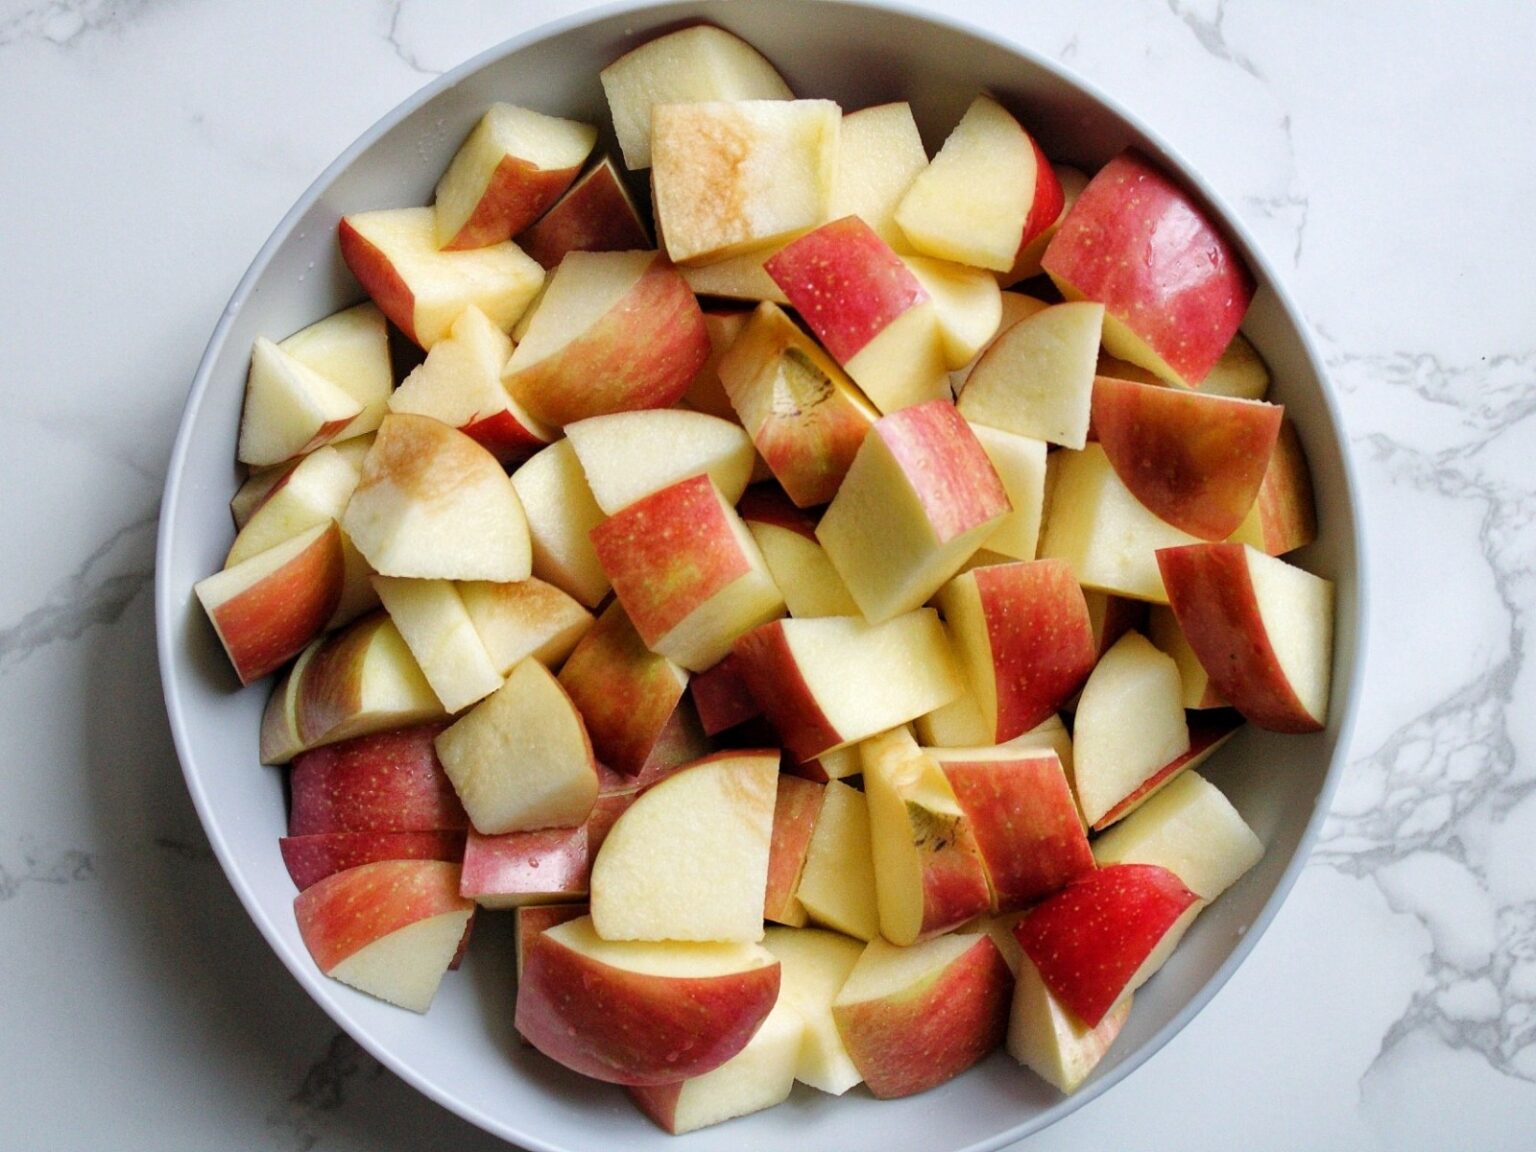 Gray bowl with chopped fuji apples.